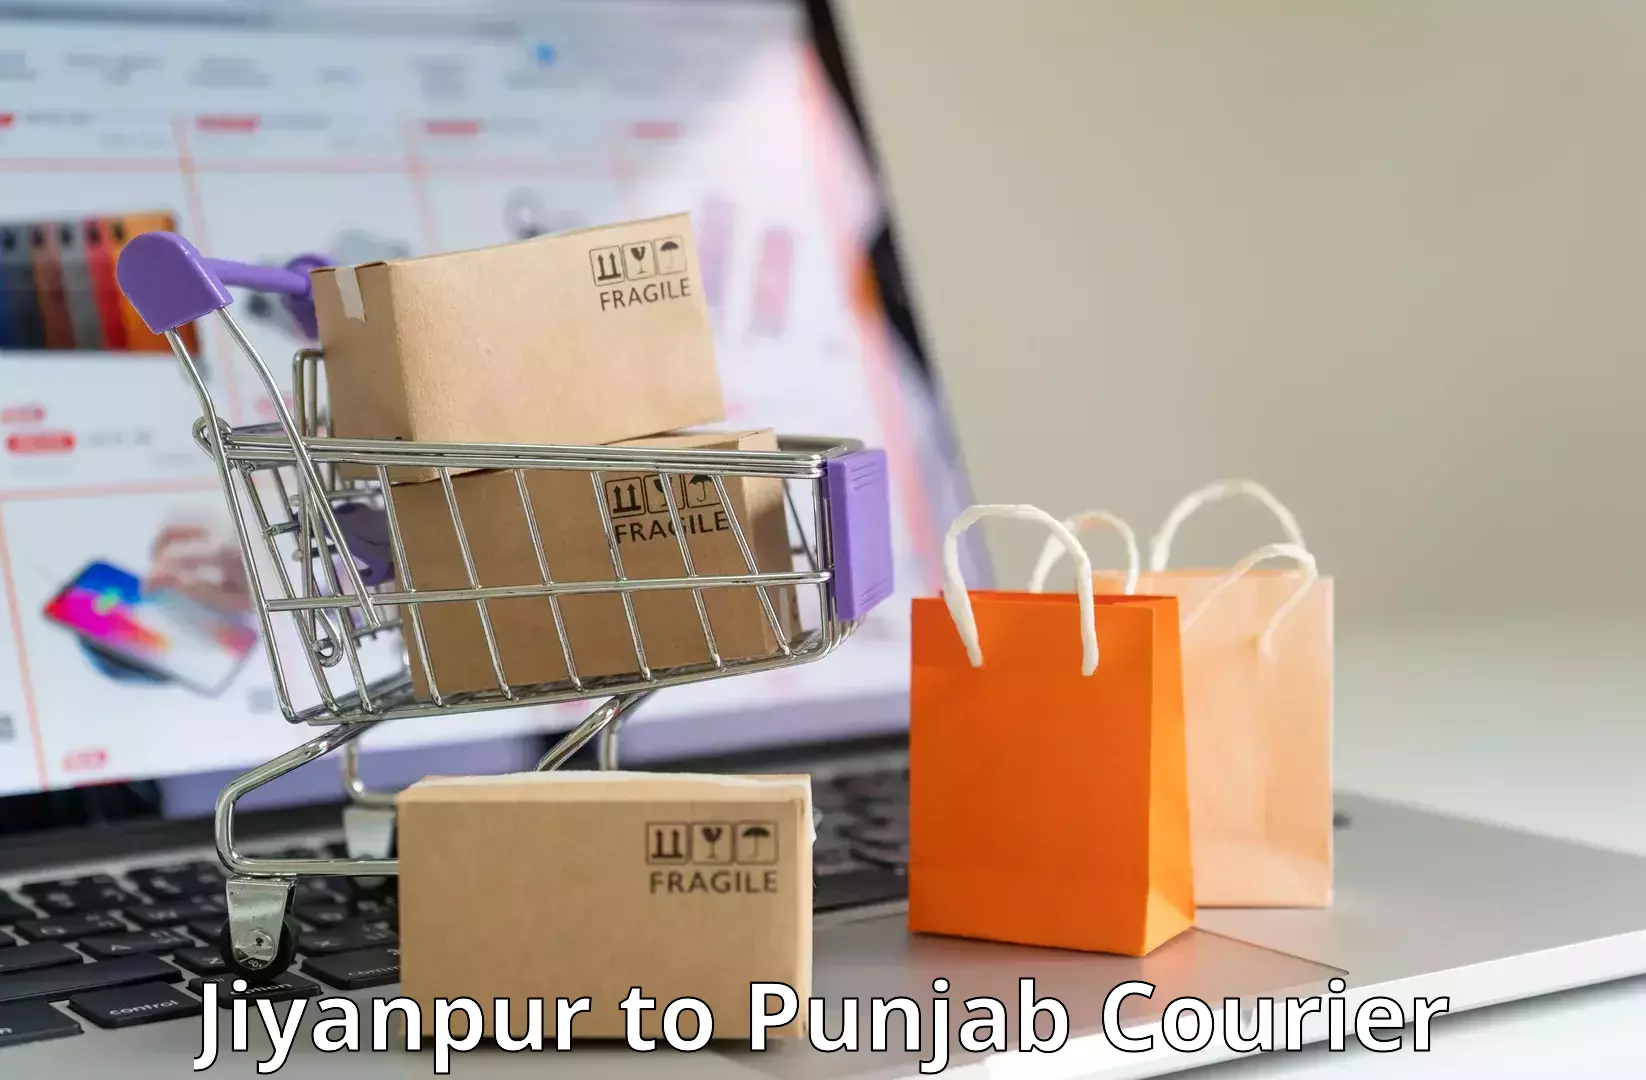 High value parcel delivery in Jiyanpur to Sirhind Fatehgarh